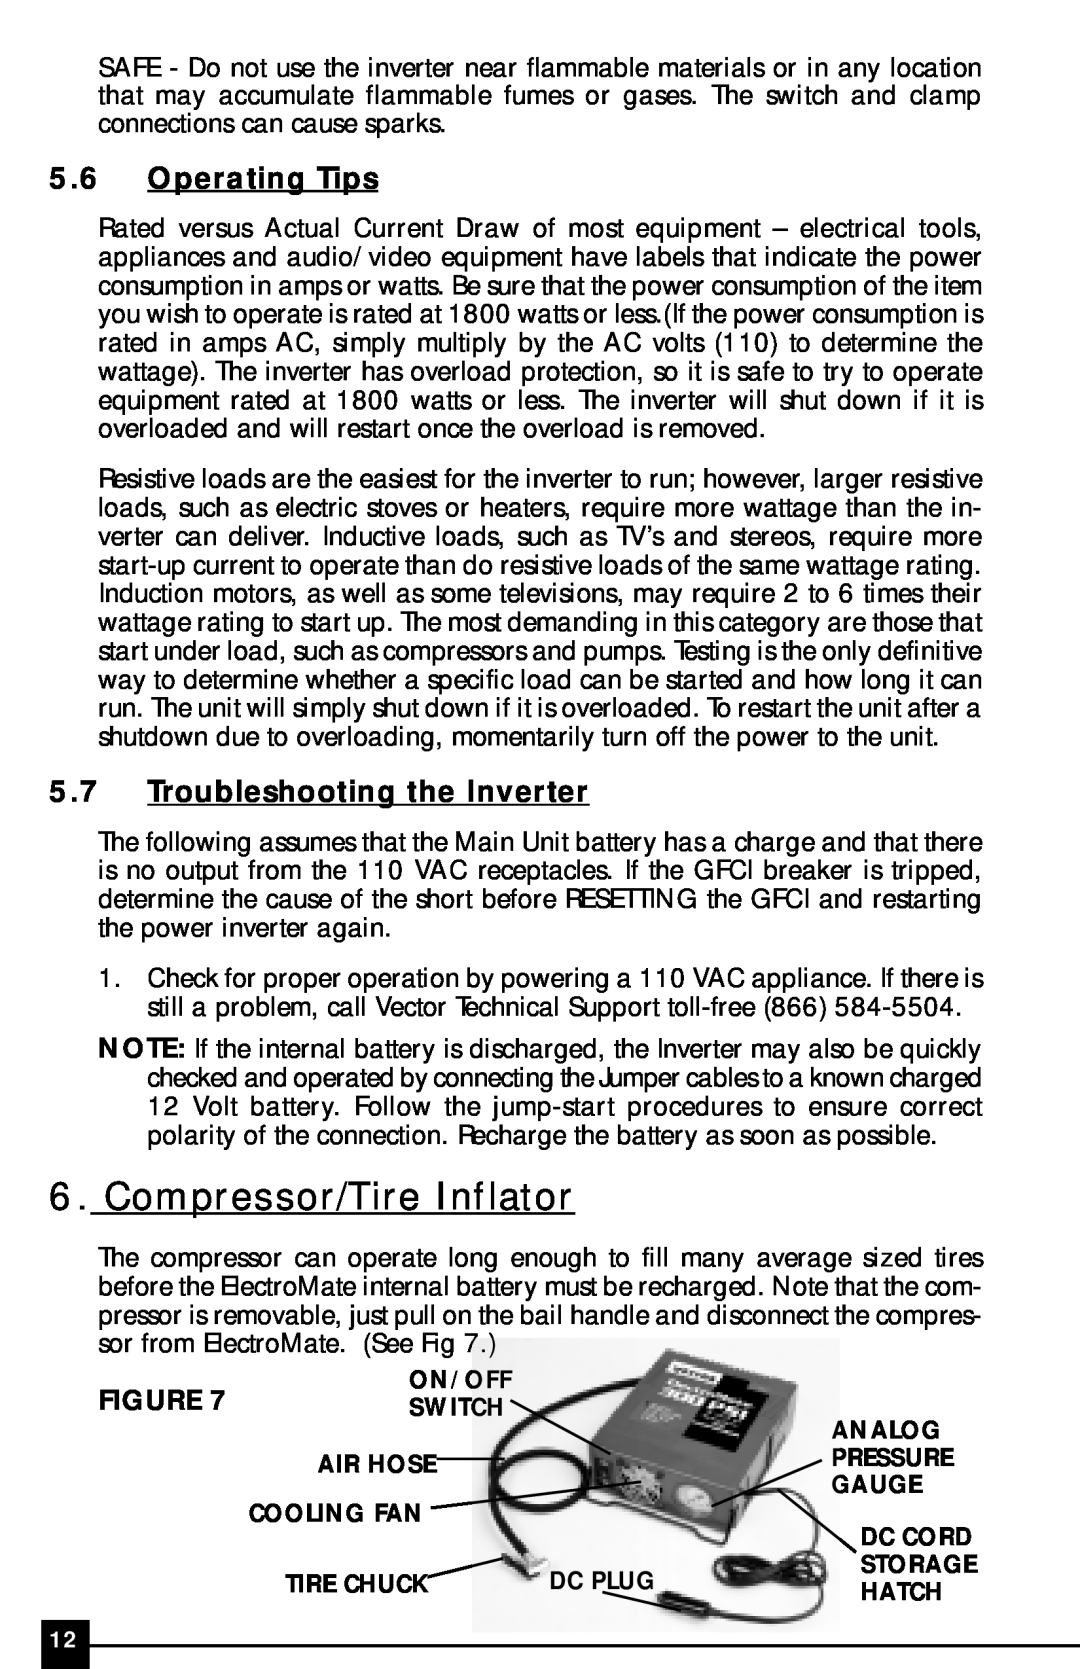 Vector VEC097 owner manual Compressor/Tire Inflator, 5.6Operating Tips, 5.7Troubleshooting the Inverter 